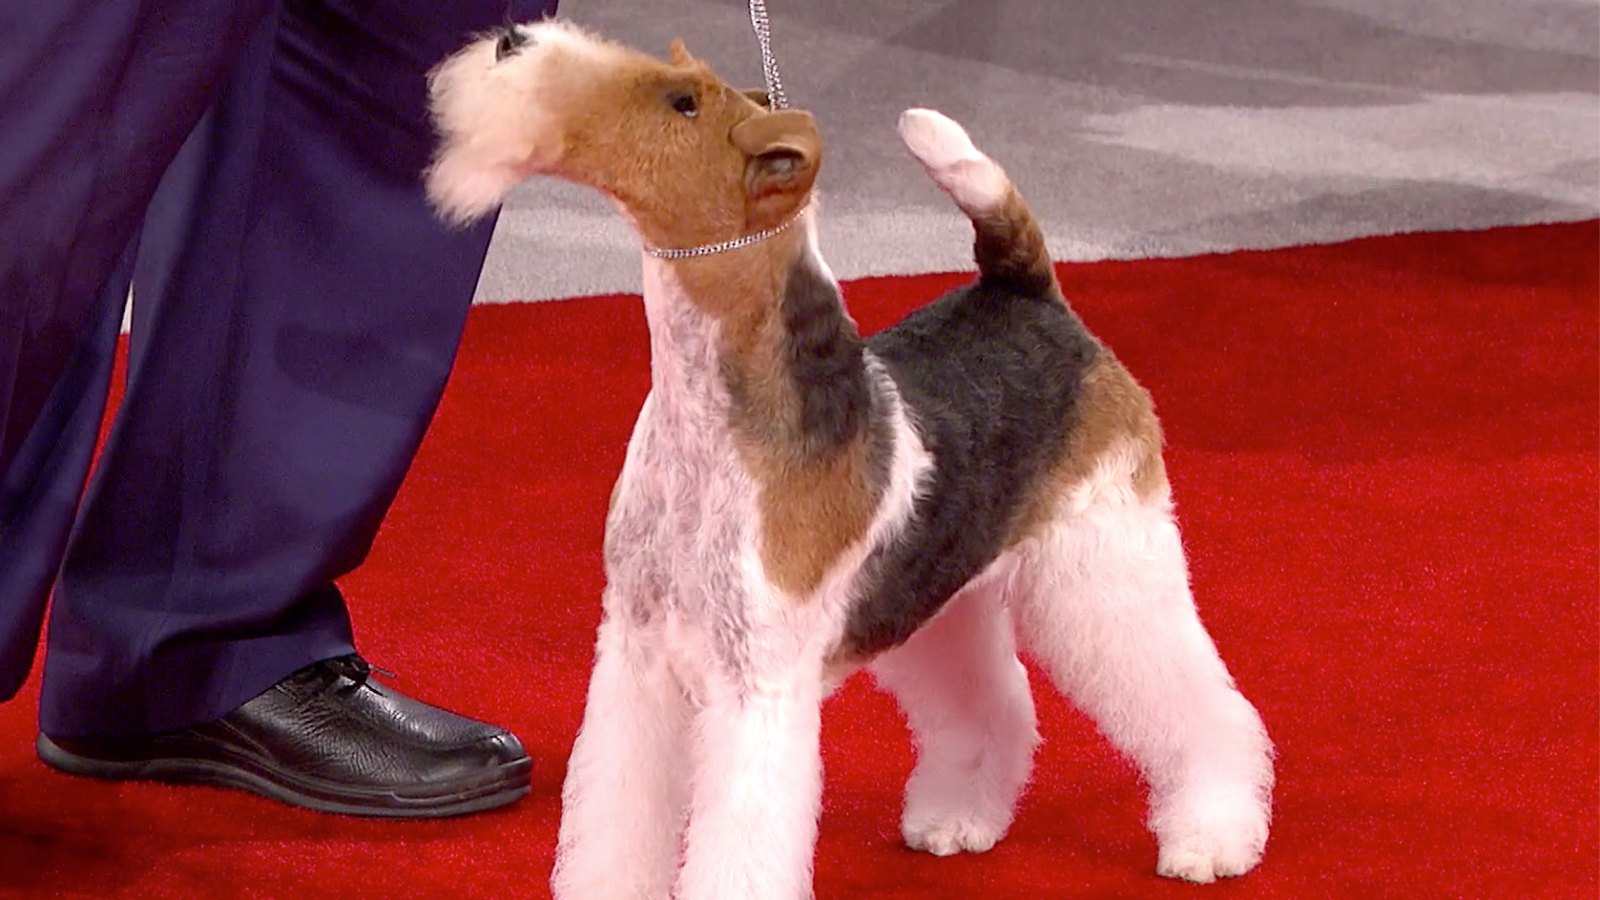 King, the winner of the 2018 Beverly Hills Dog Show